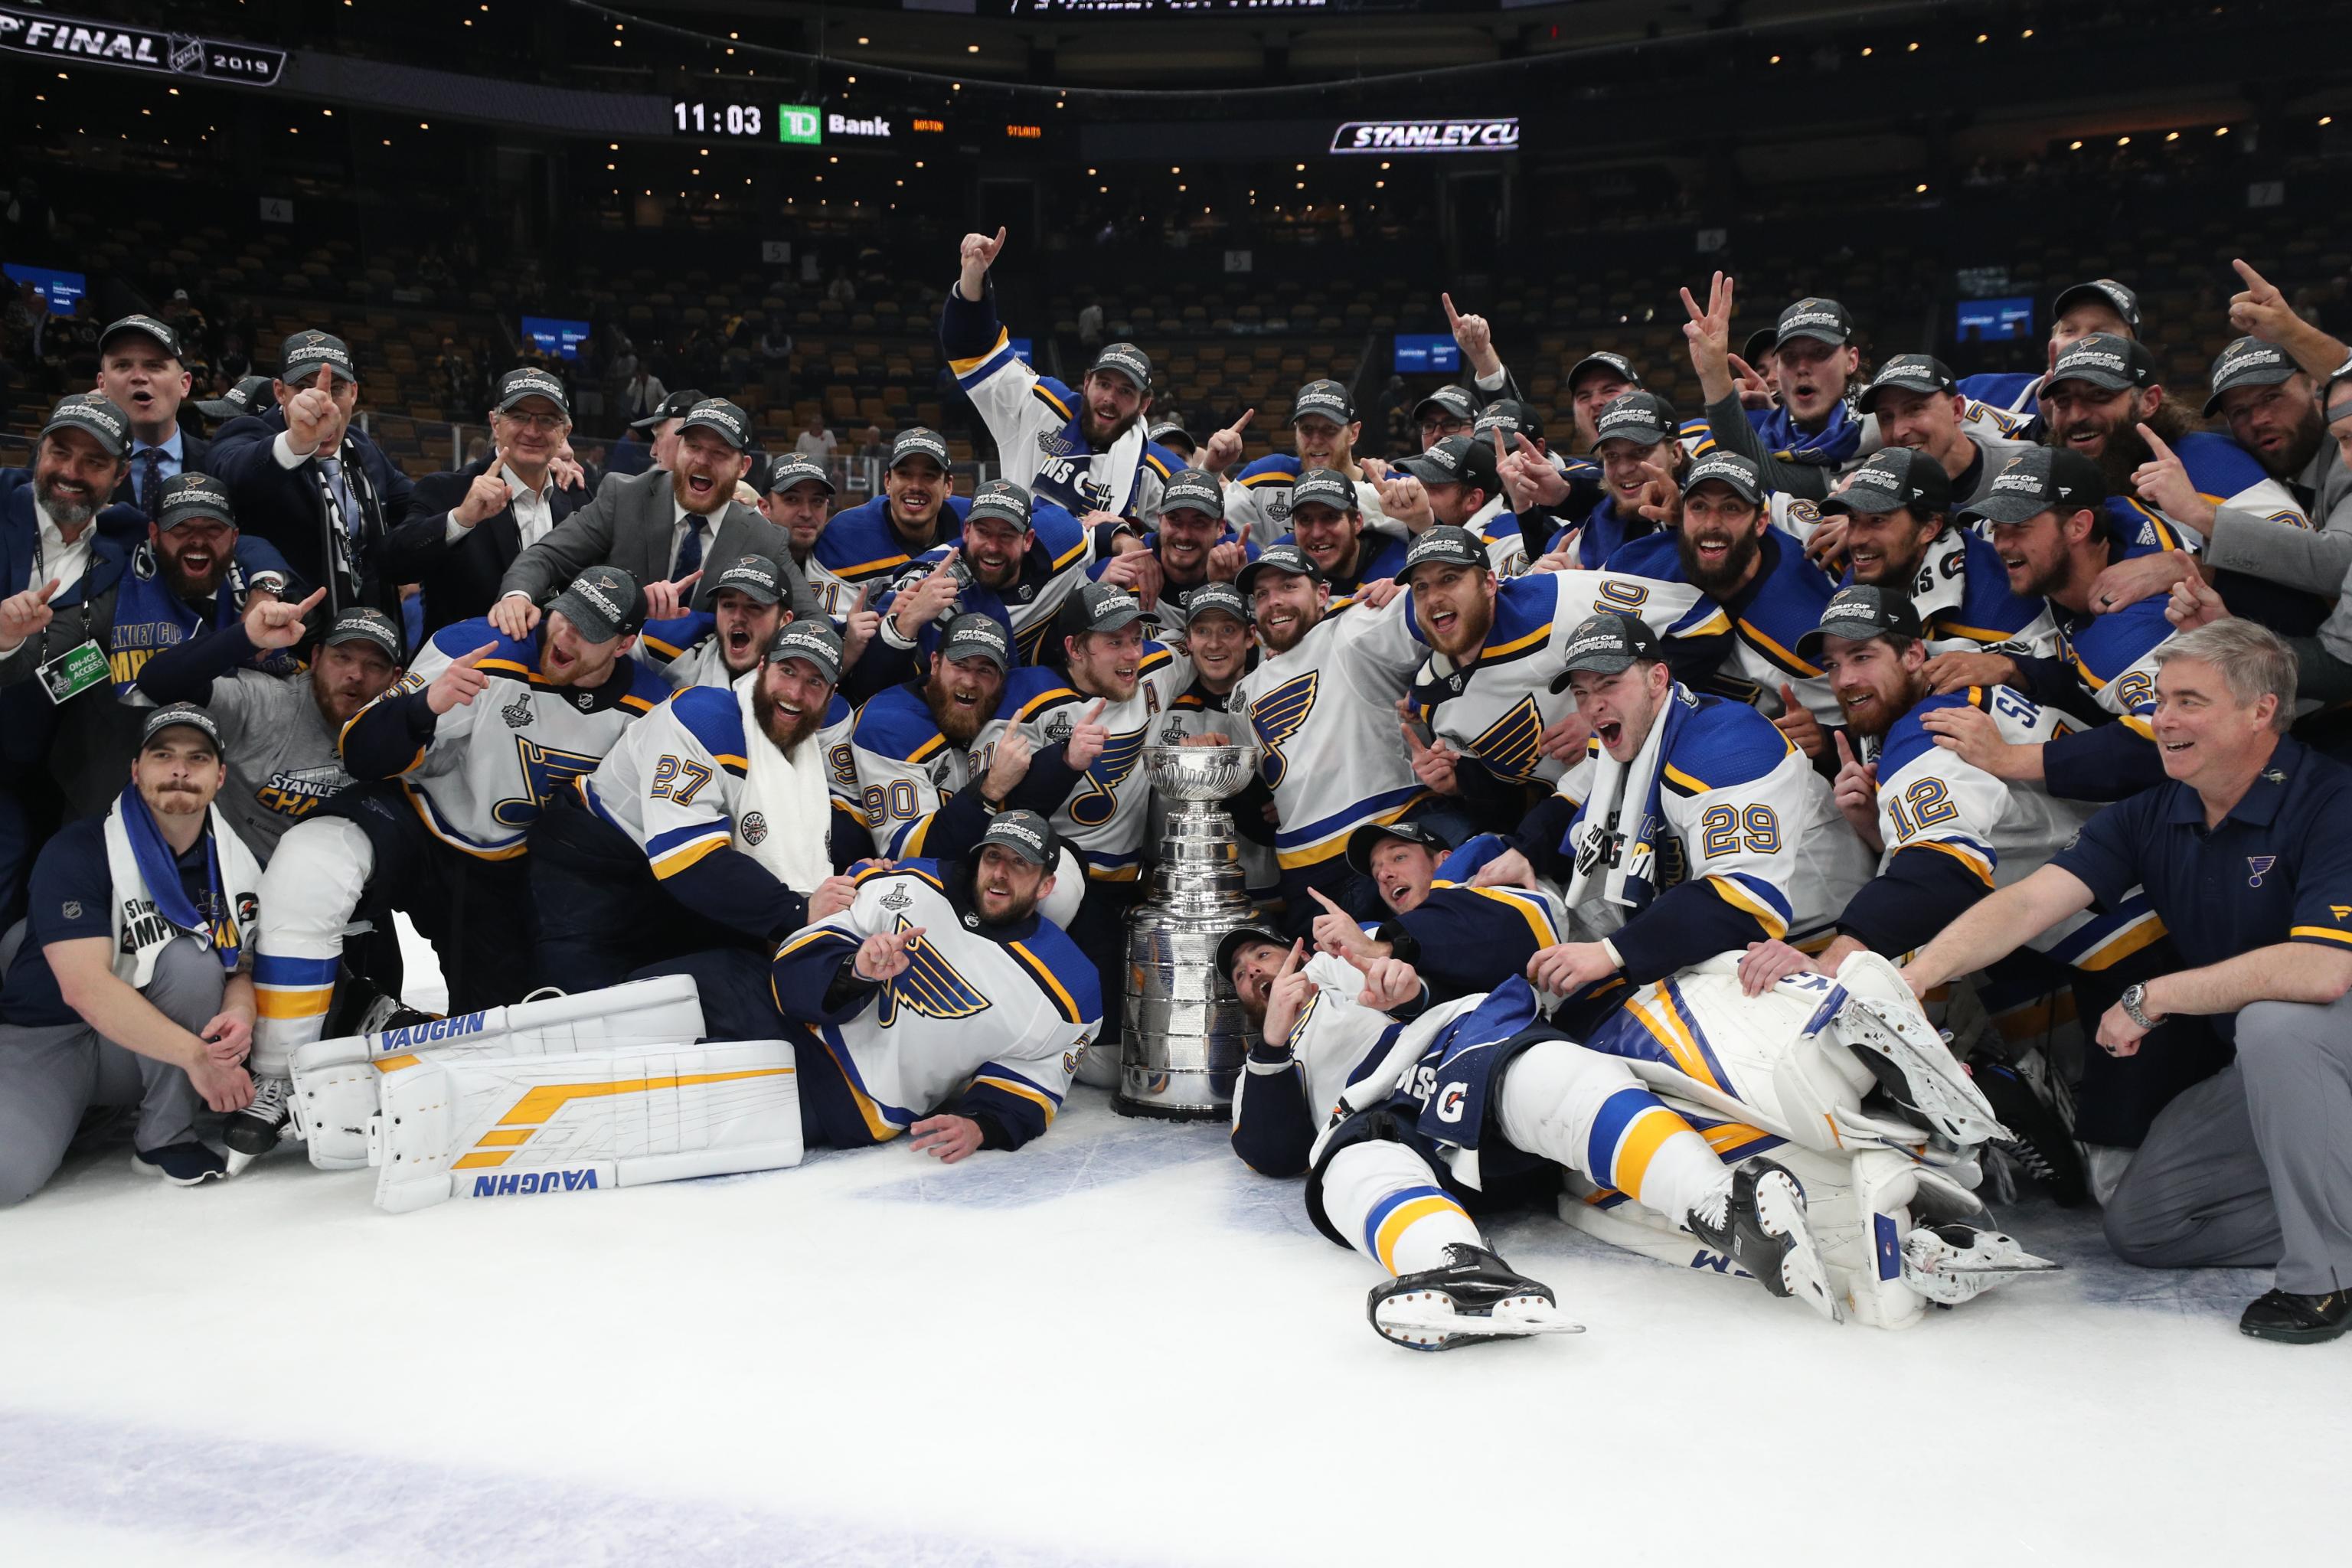 Many tears and years later, my St. Louis Blues won the Stanley Cup